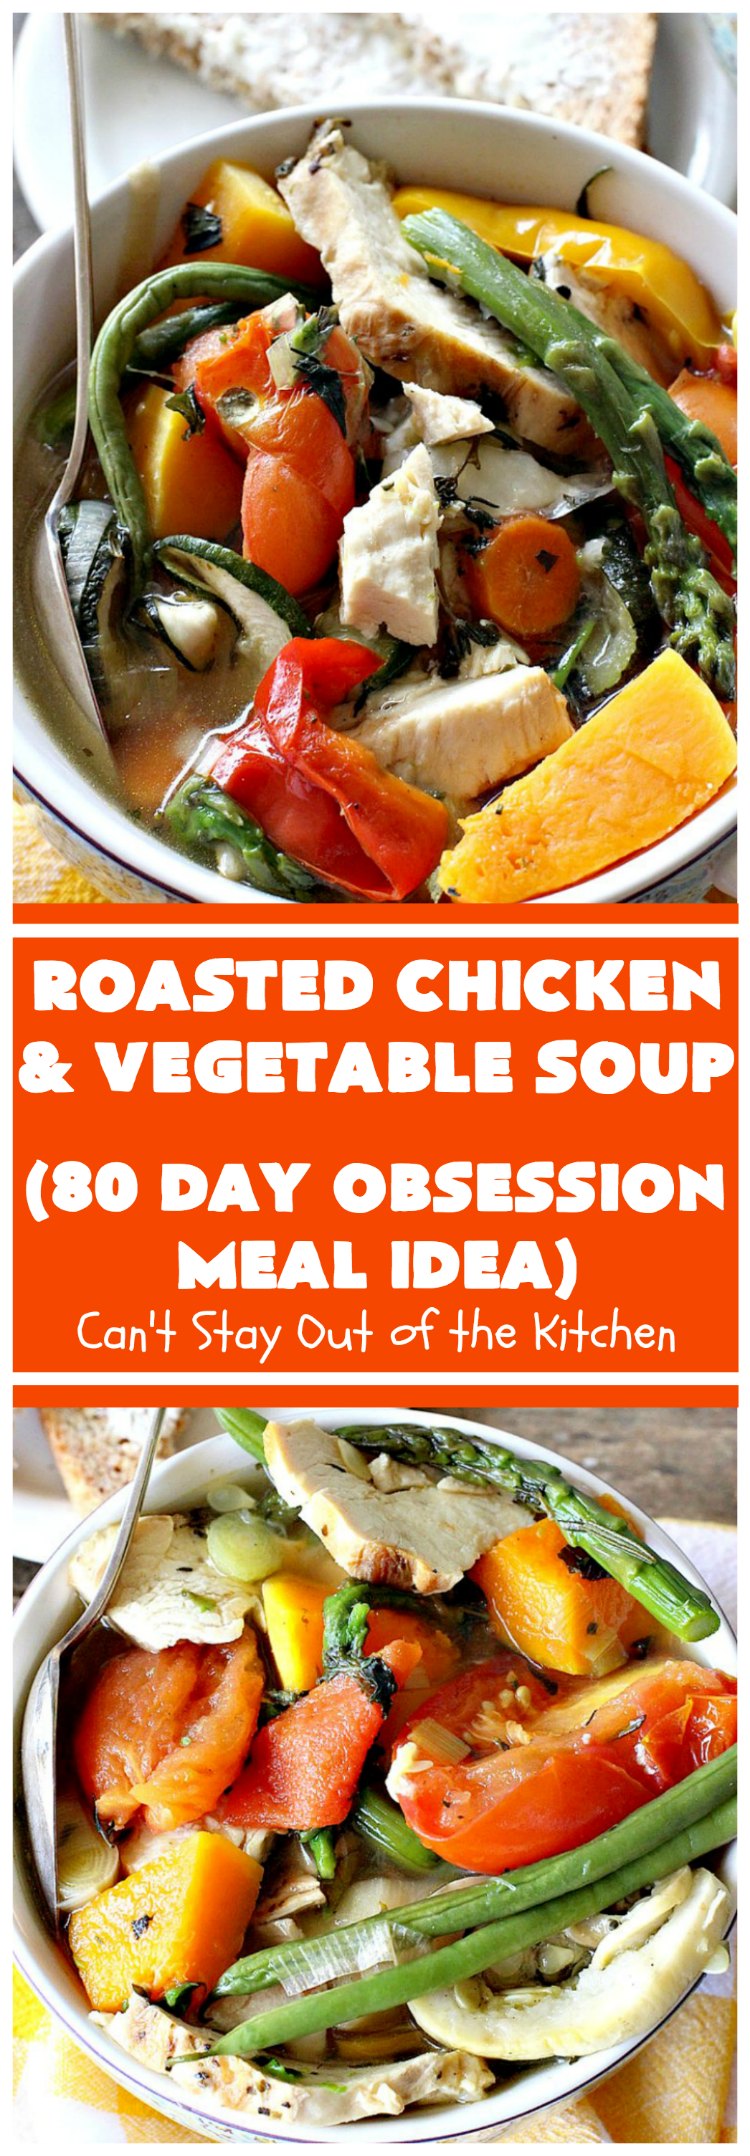 Roasted Chicken & Vegetable Soup | Can't Stay Out of the Kitchen